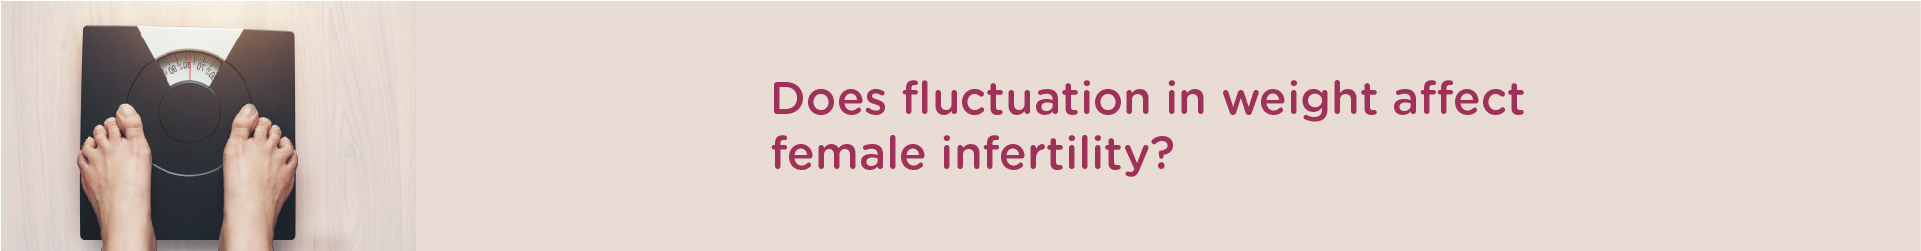 Does Fluctuation In Weight Affect Female Infertility?